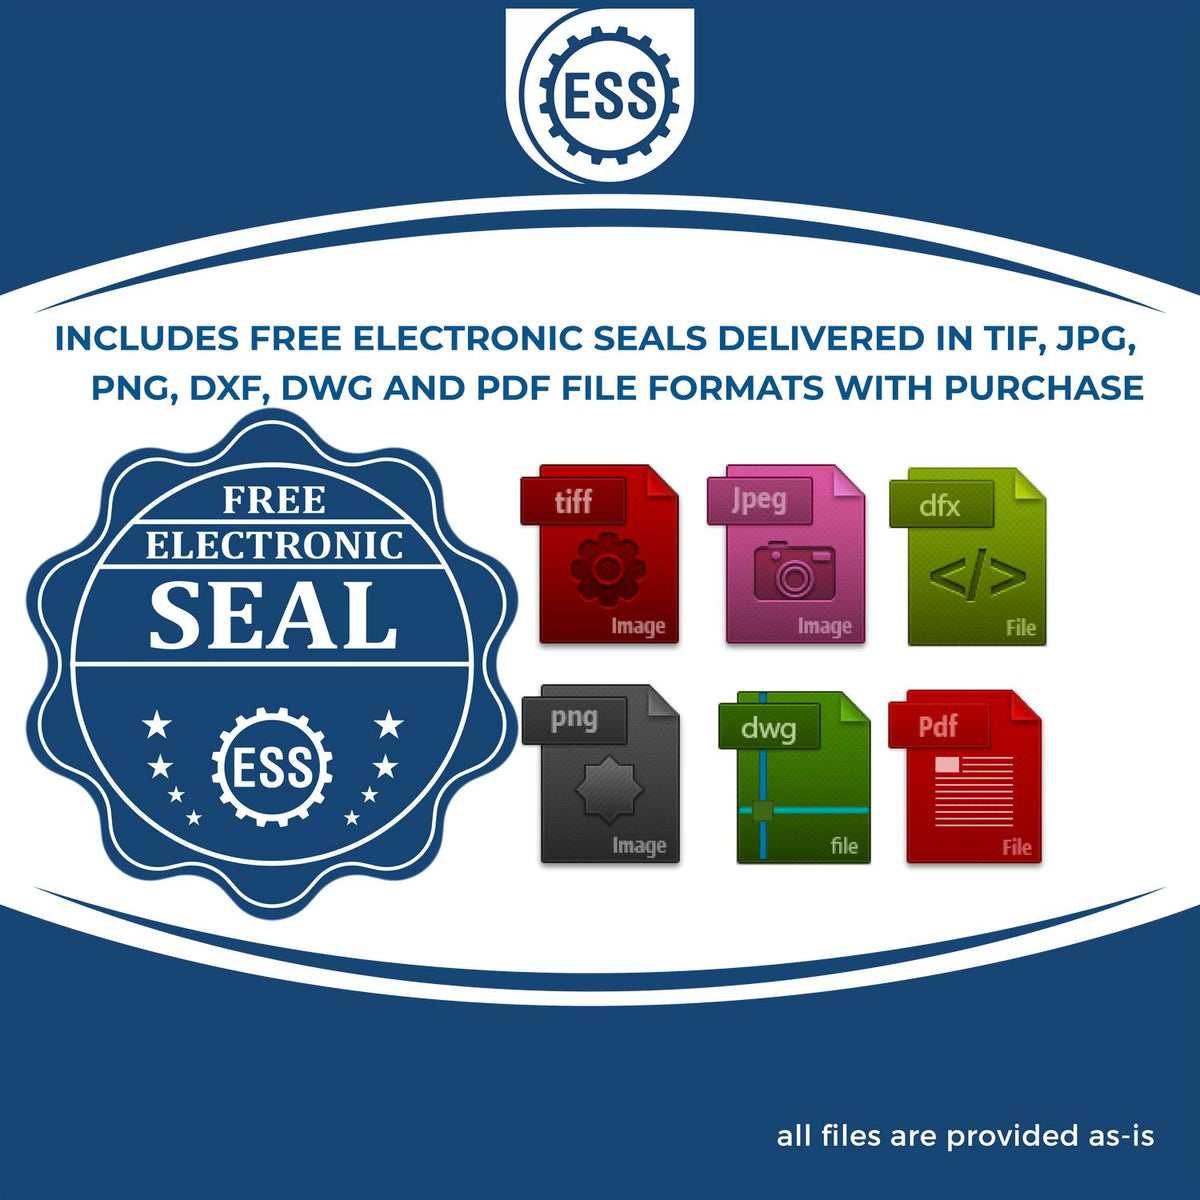 An infographic for the free electronic seal for the Wooden Handle Kentucky State Seal Notary Public Stamp illustrating the different file type icons such as DXF, DWG, TIF, JPG and PNG.